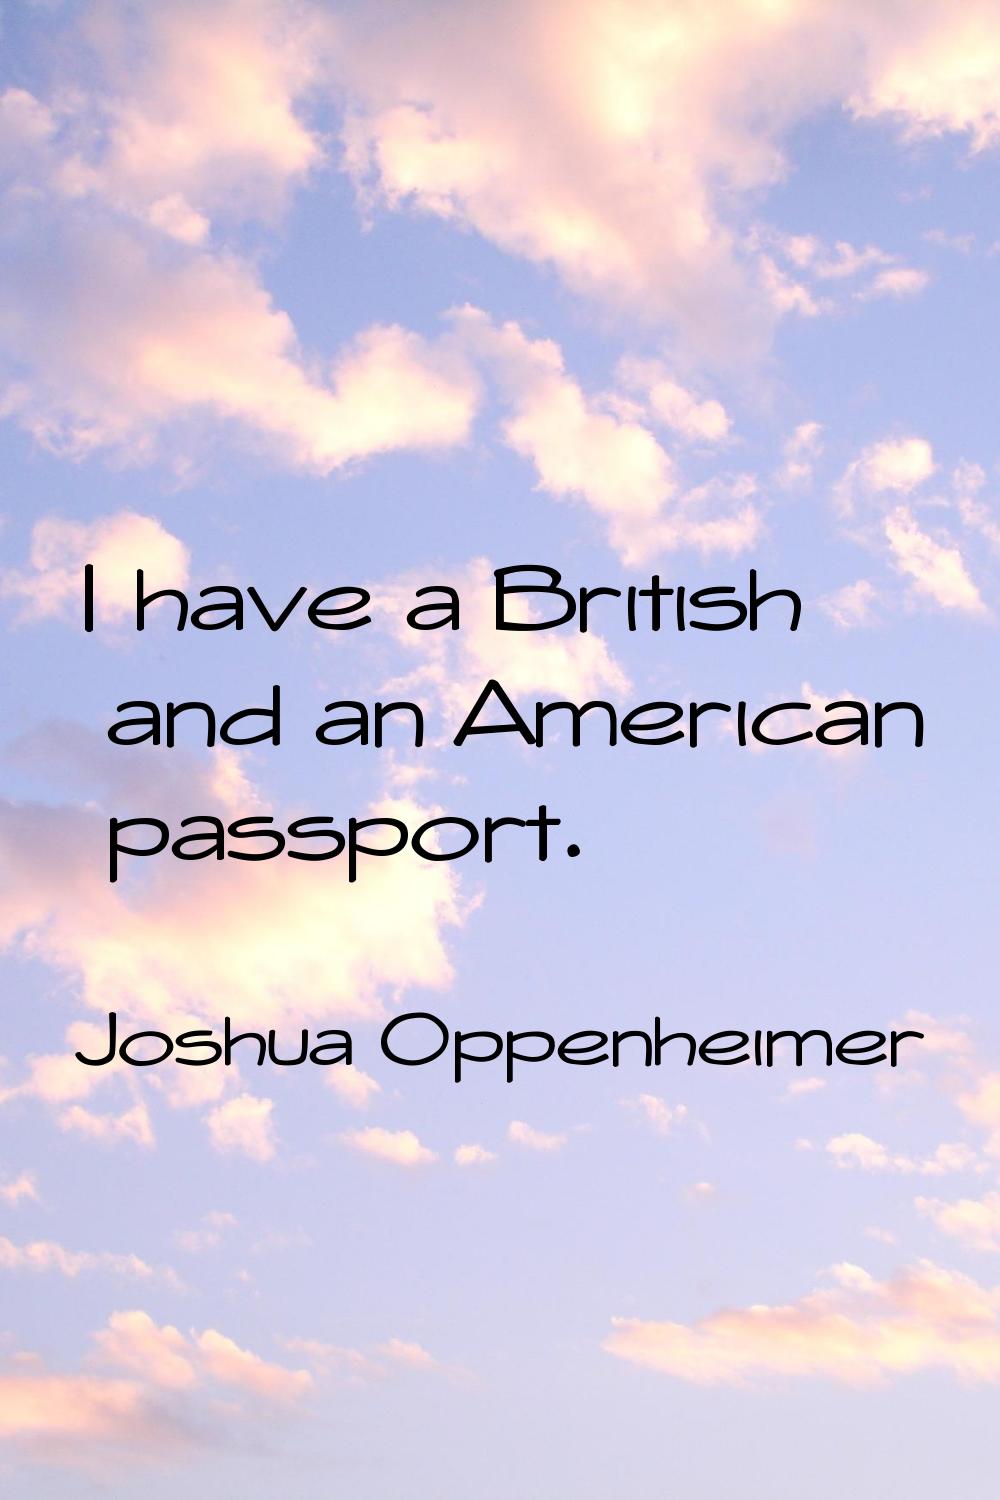 I have a British and an American passport.